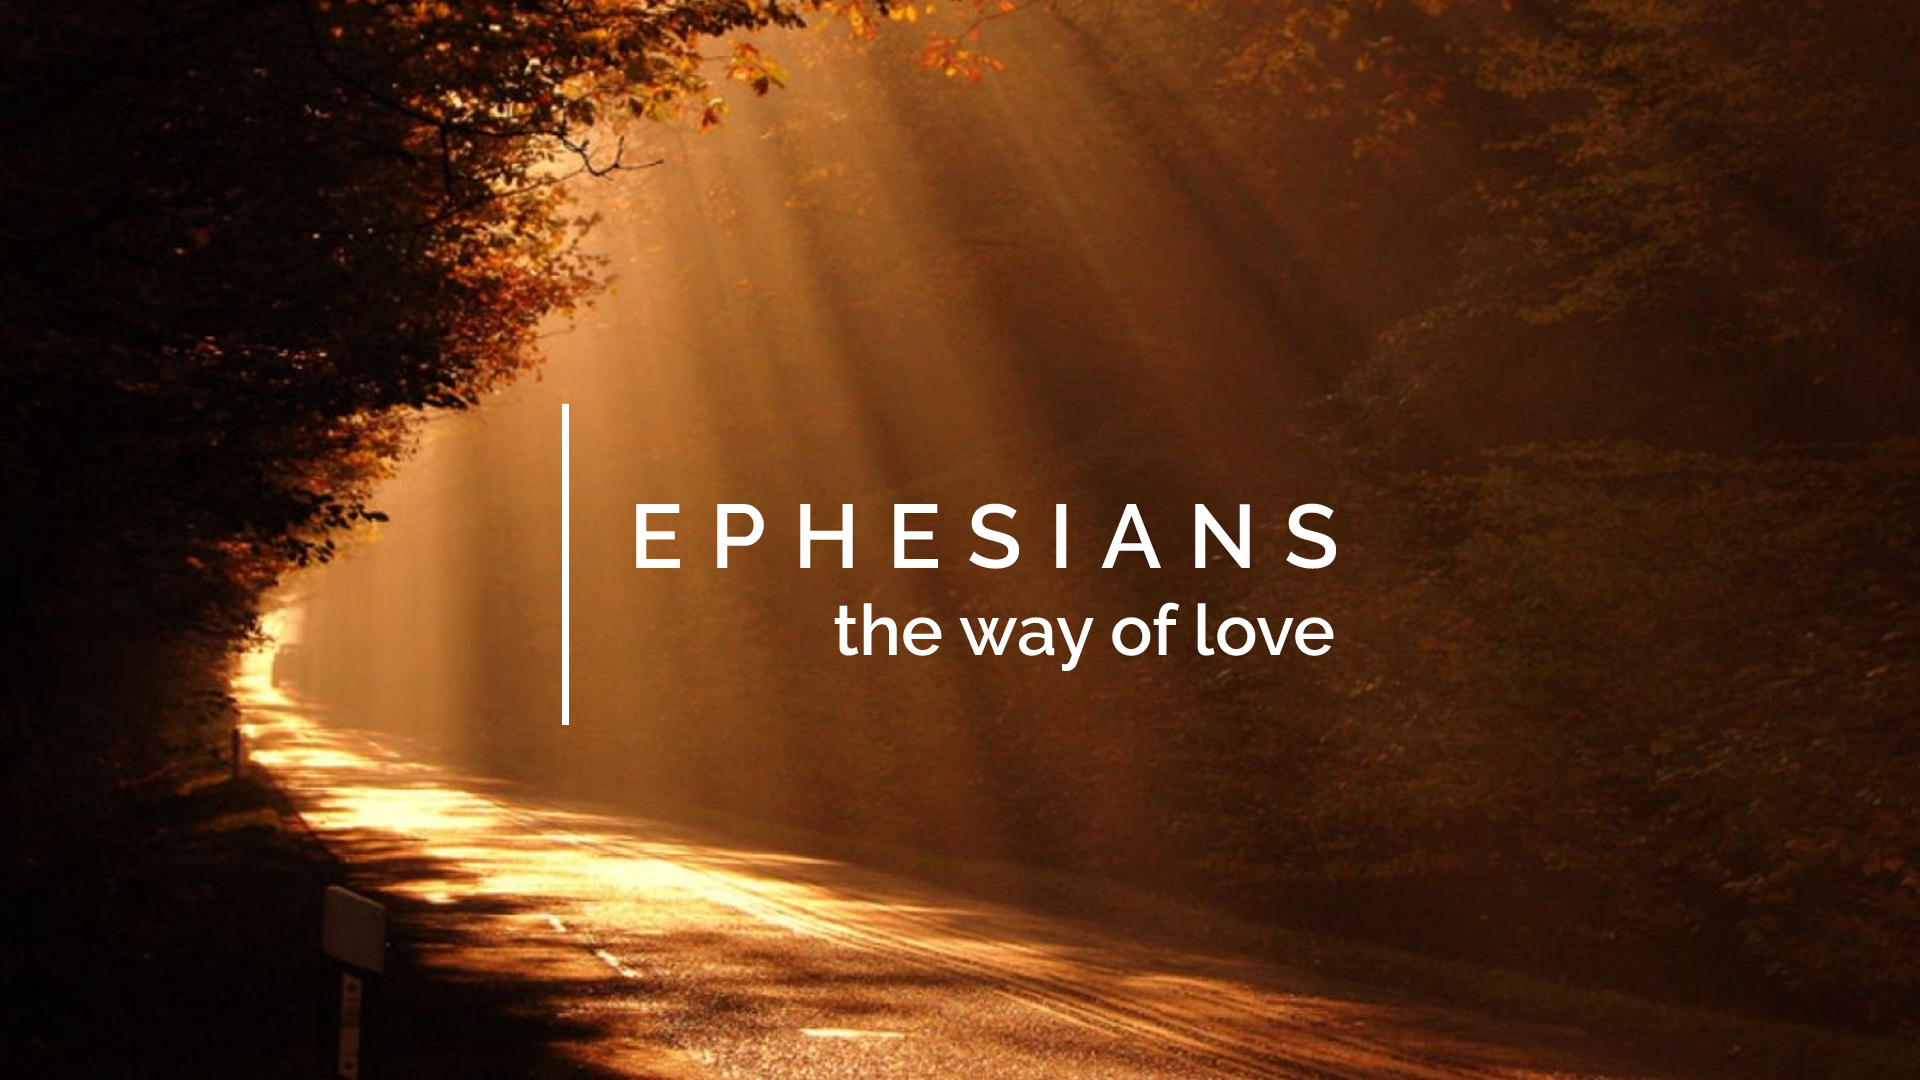 EPHESIANS | The Way of Love - I Heard You The First Time 